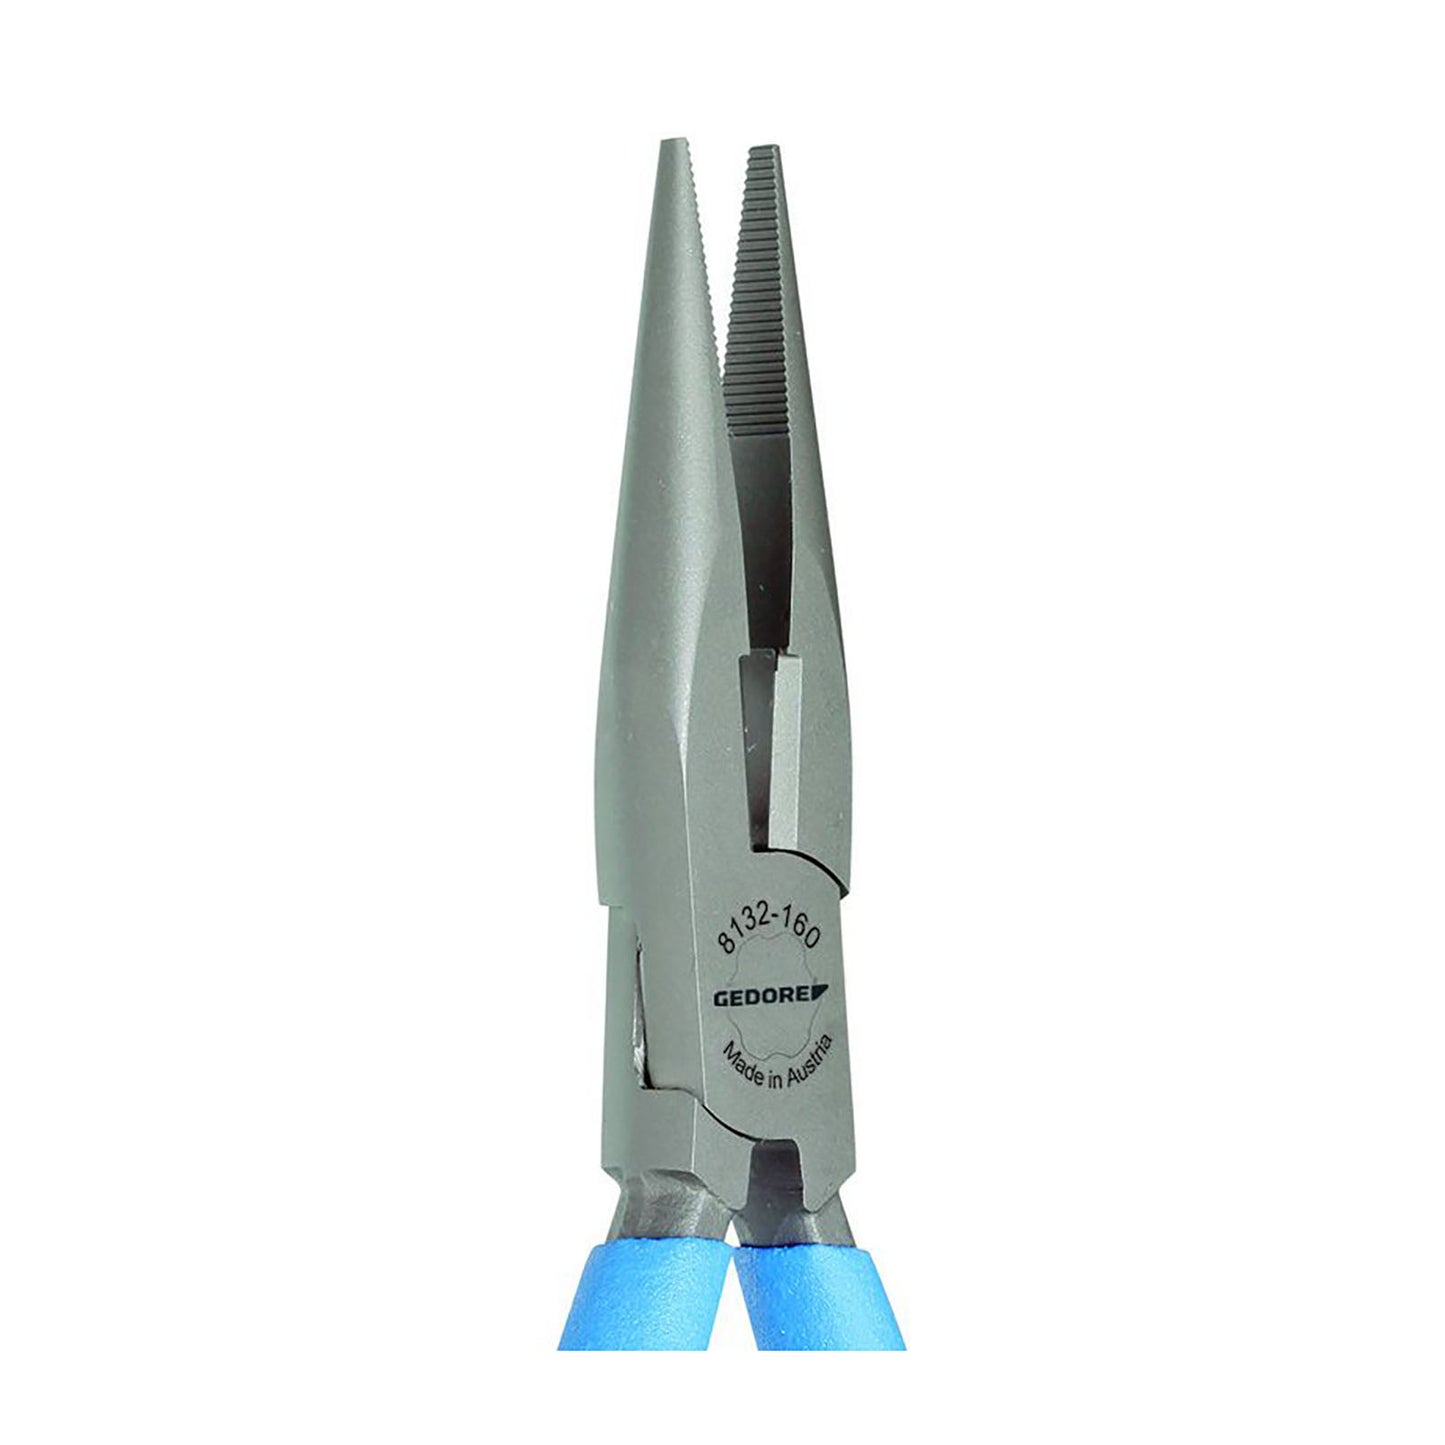 GEDORE 8132-160 TL - Semi-round nose pliers 160mm (6710880)